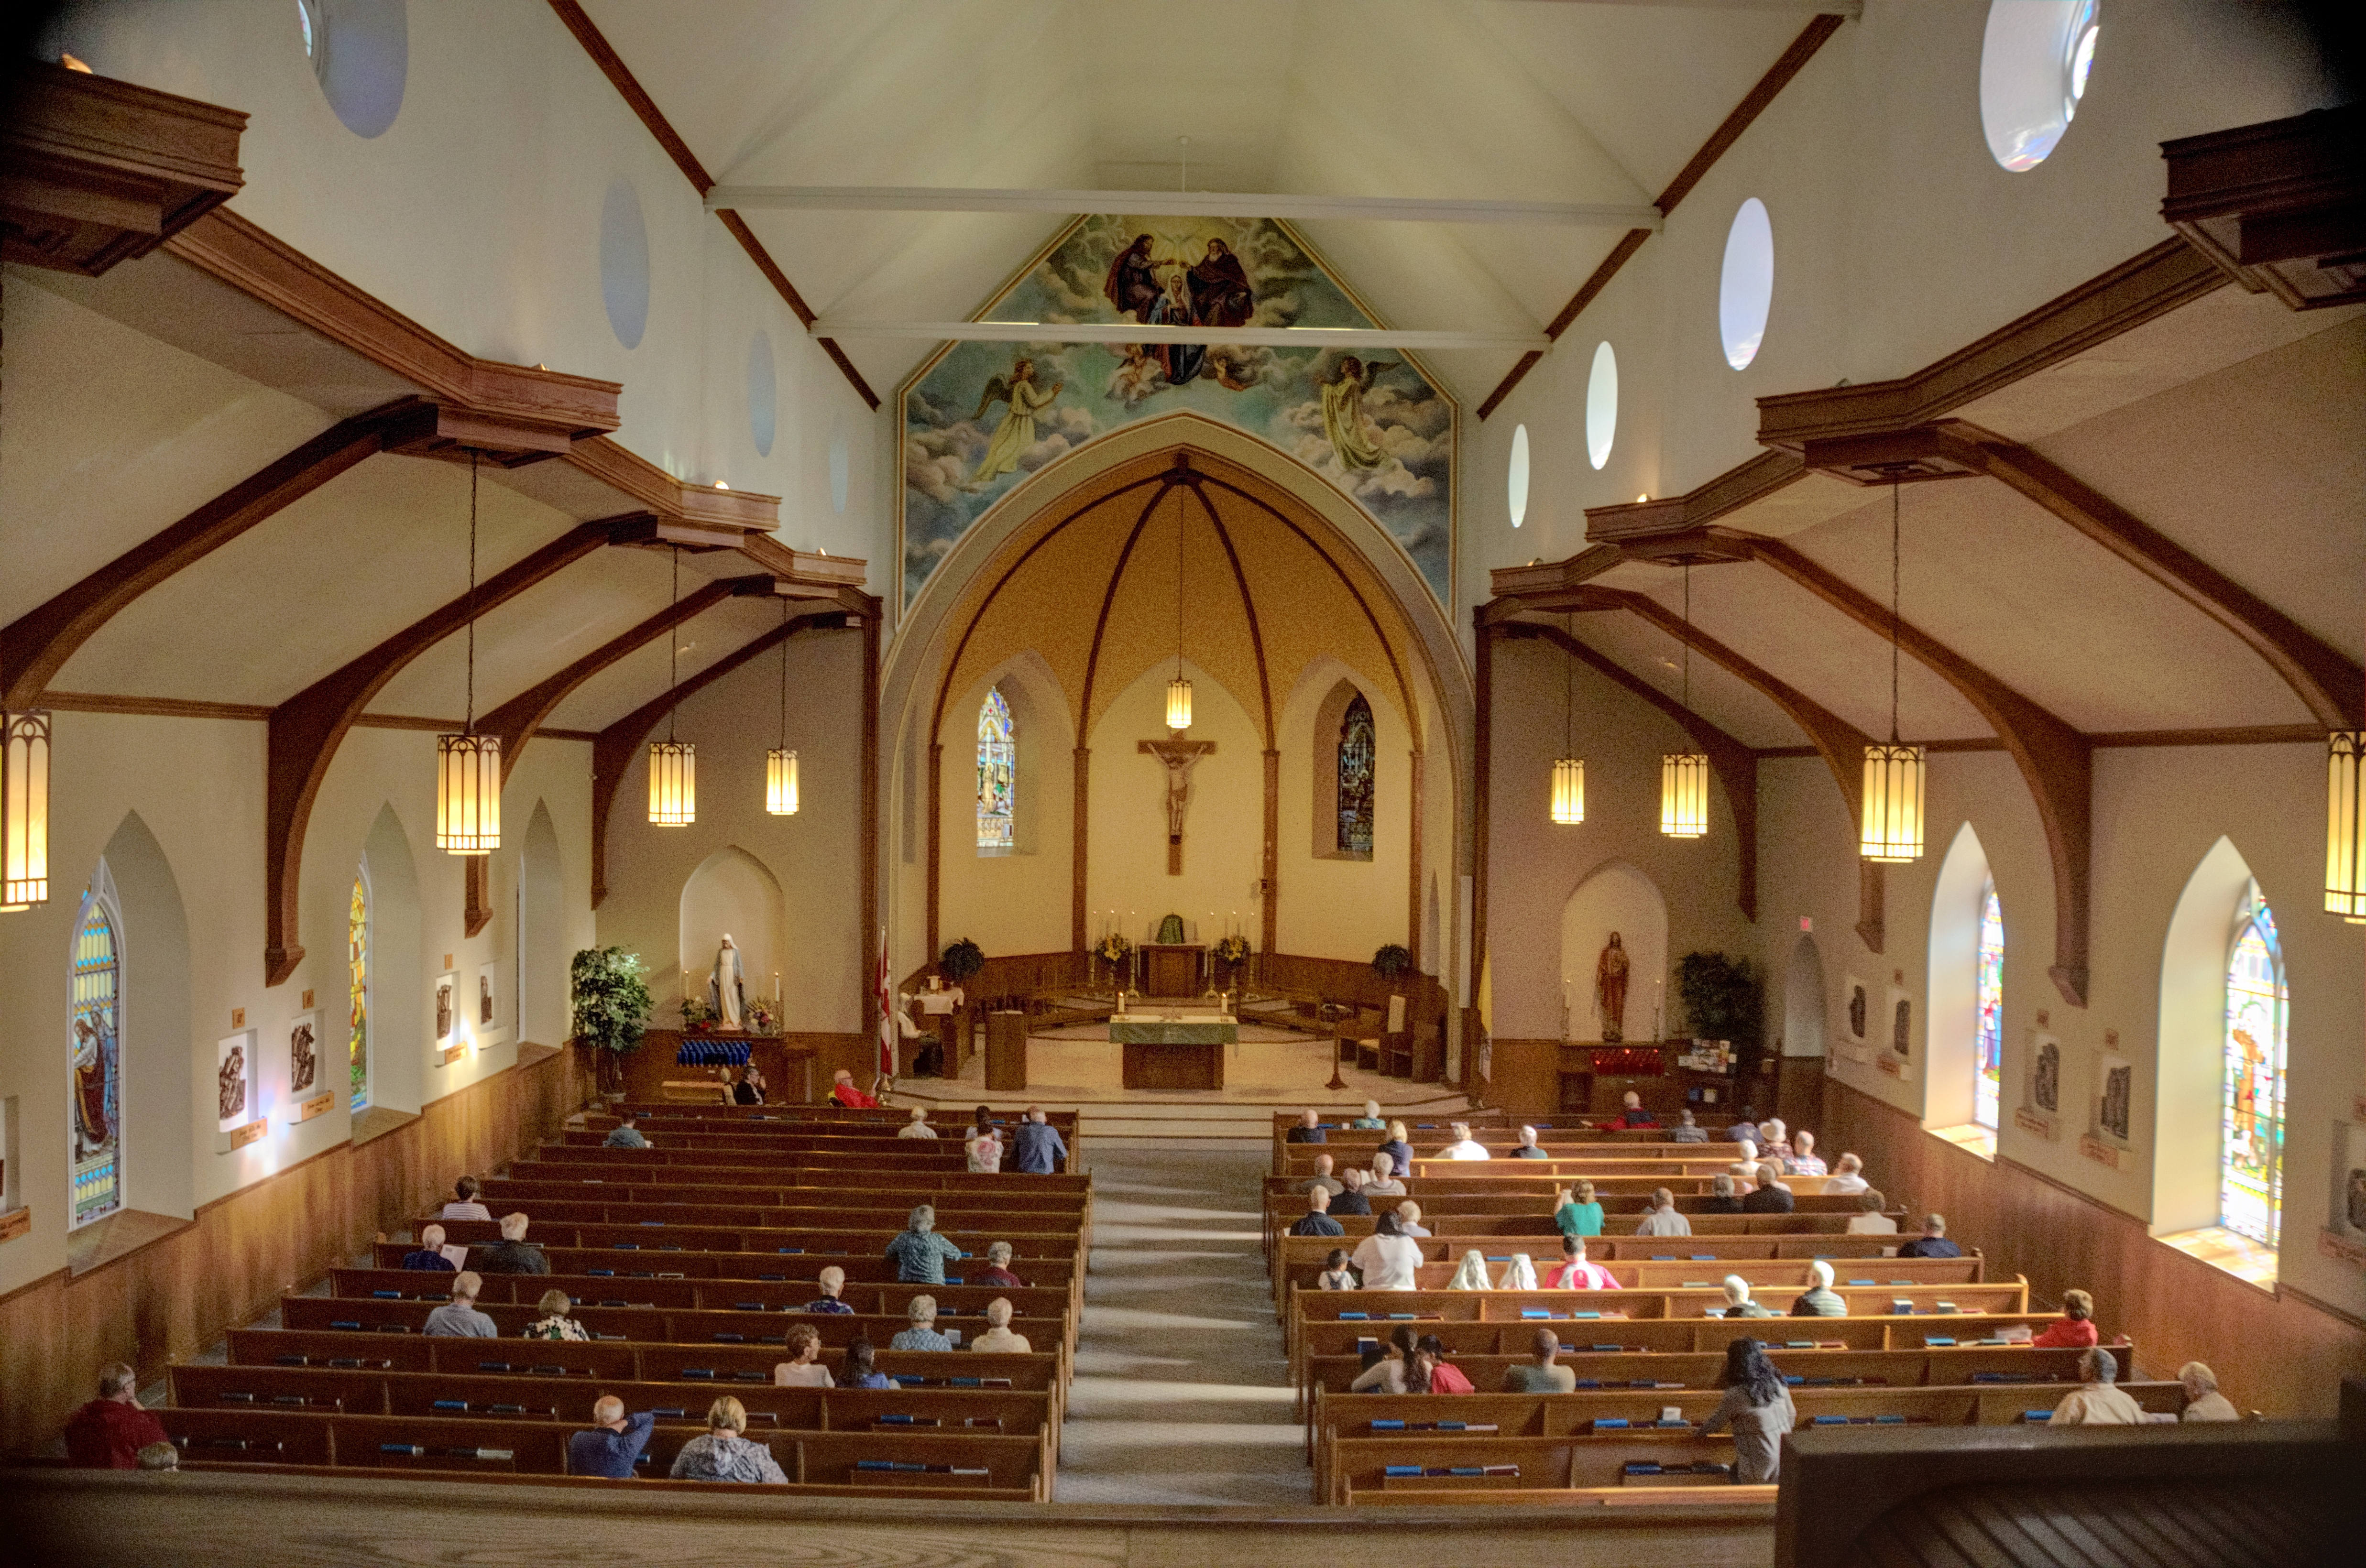 Image of St. Margaret's during Mass from the choir loft